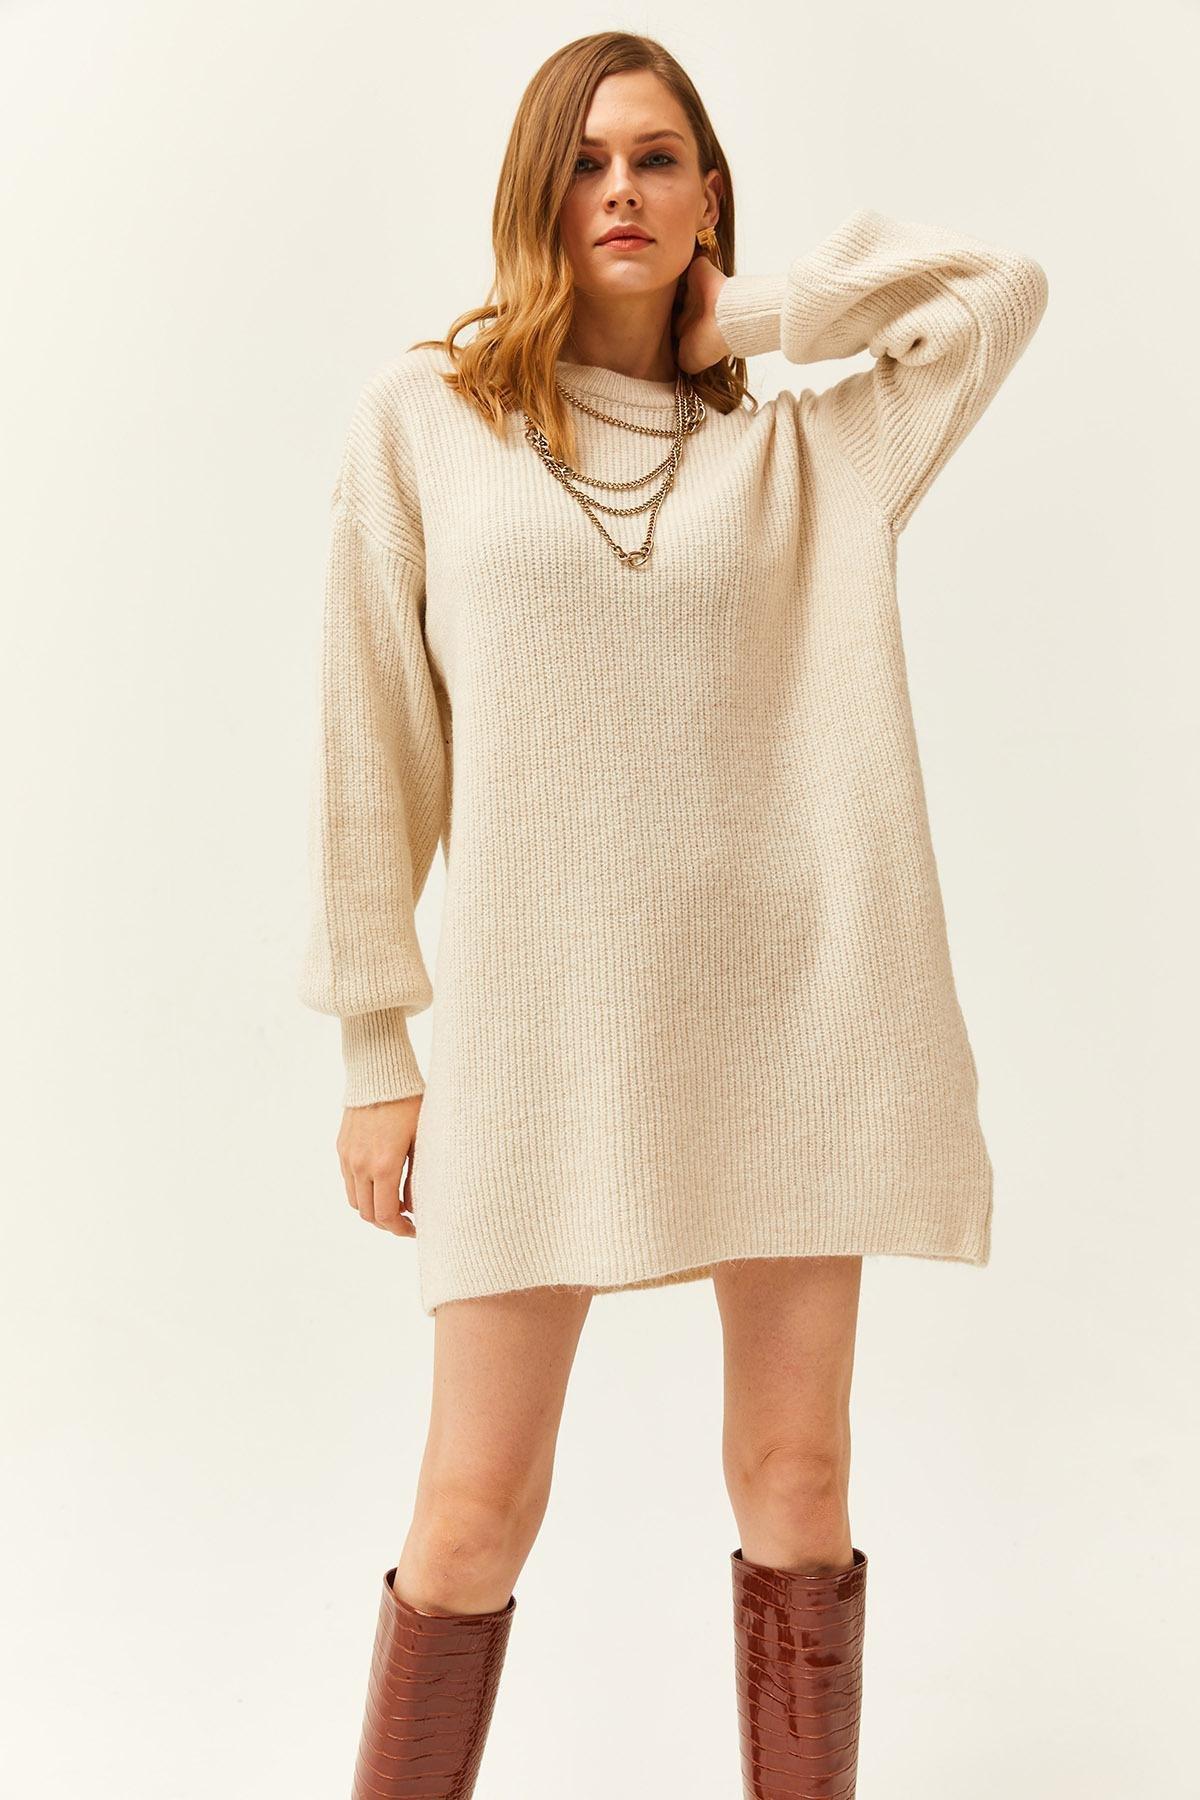 Olalook - Beige Crew Neck Knitted Tunic Dress